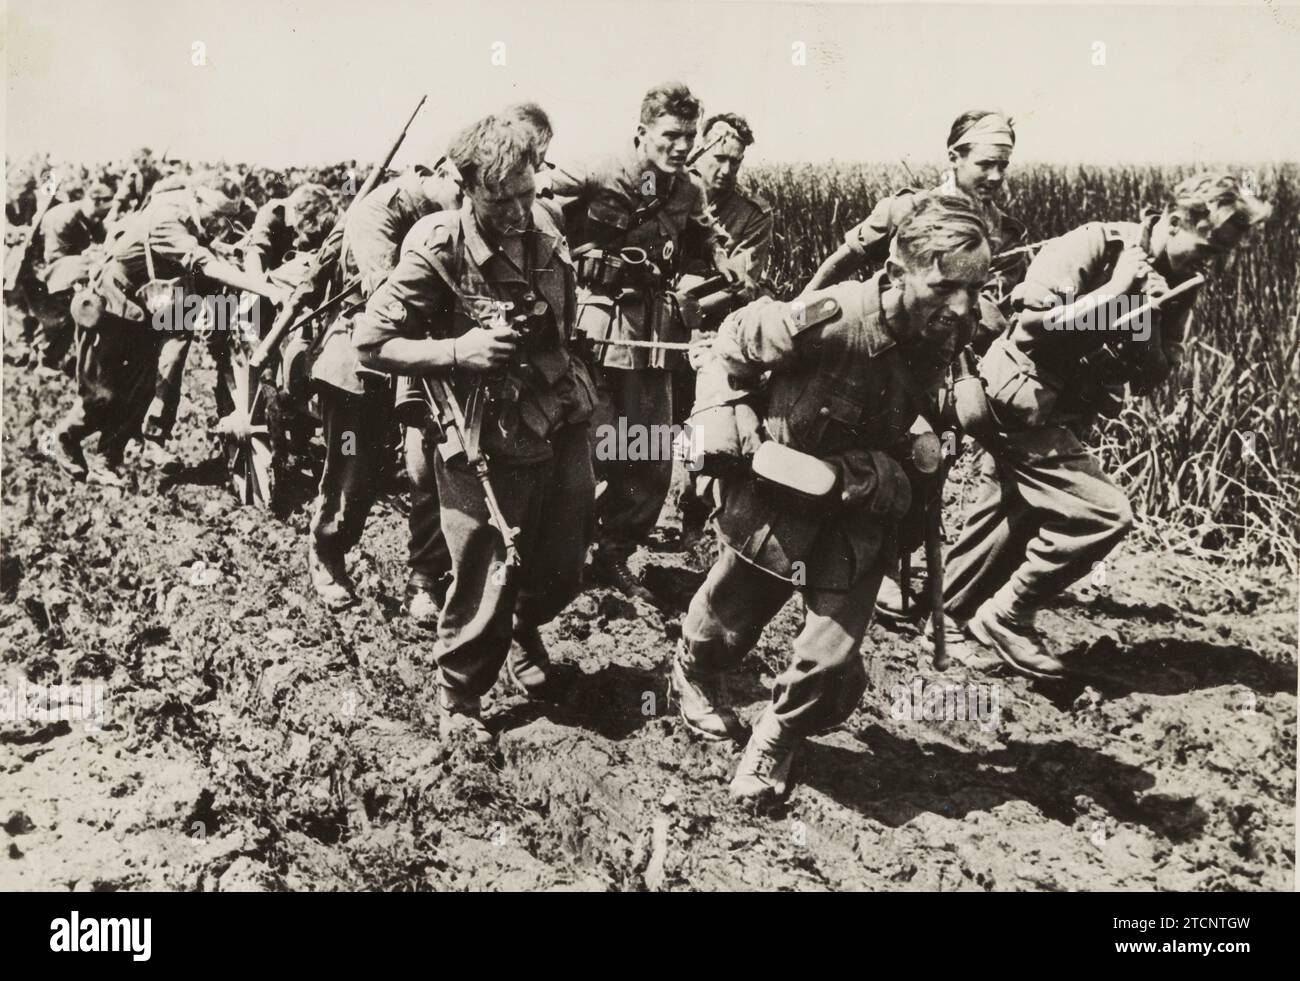 Russia, August 1942. The hardships of war in Russia. The German Infantry advances with great difficulty through the swampy terrain of the Don delta. At the cost of great effort they make the ammunition carts roll over the muddy roads. Credit: Album / Archivo ABC / Heinrich Hoffmann Stock Photo